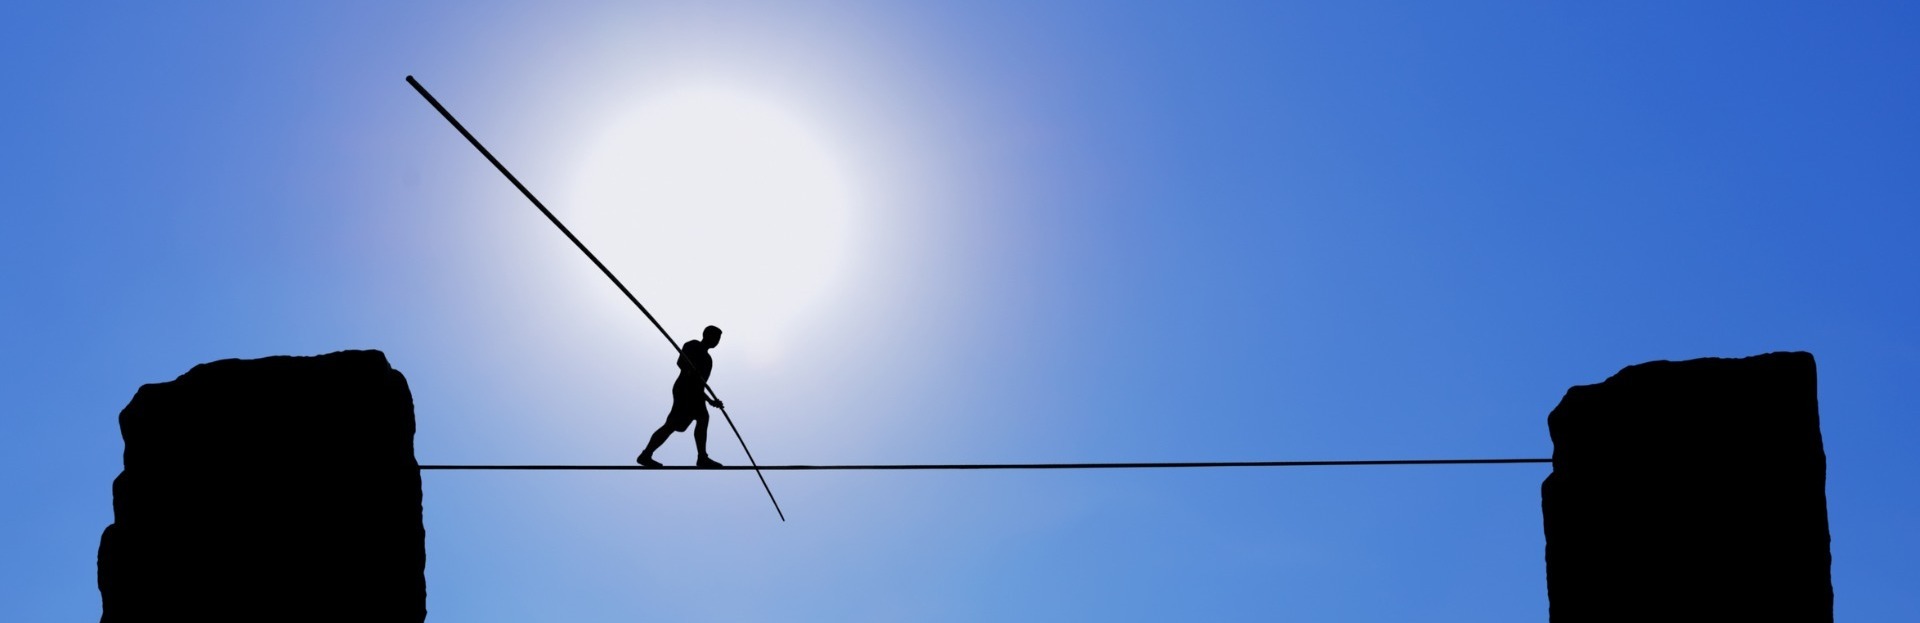 A man walking on a tightrope between two pillars of rock against a bright blue sky. He's using a long pole to help with his balance.